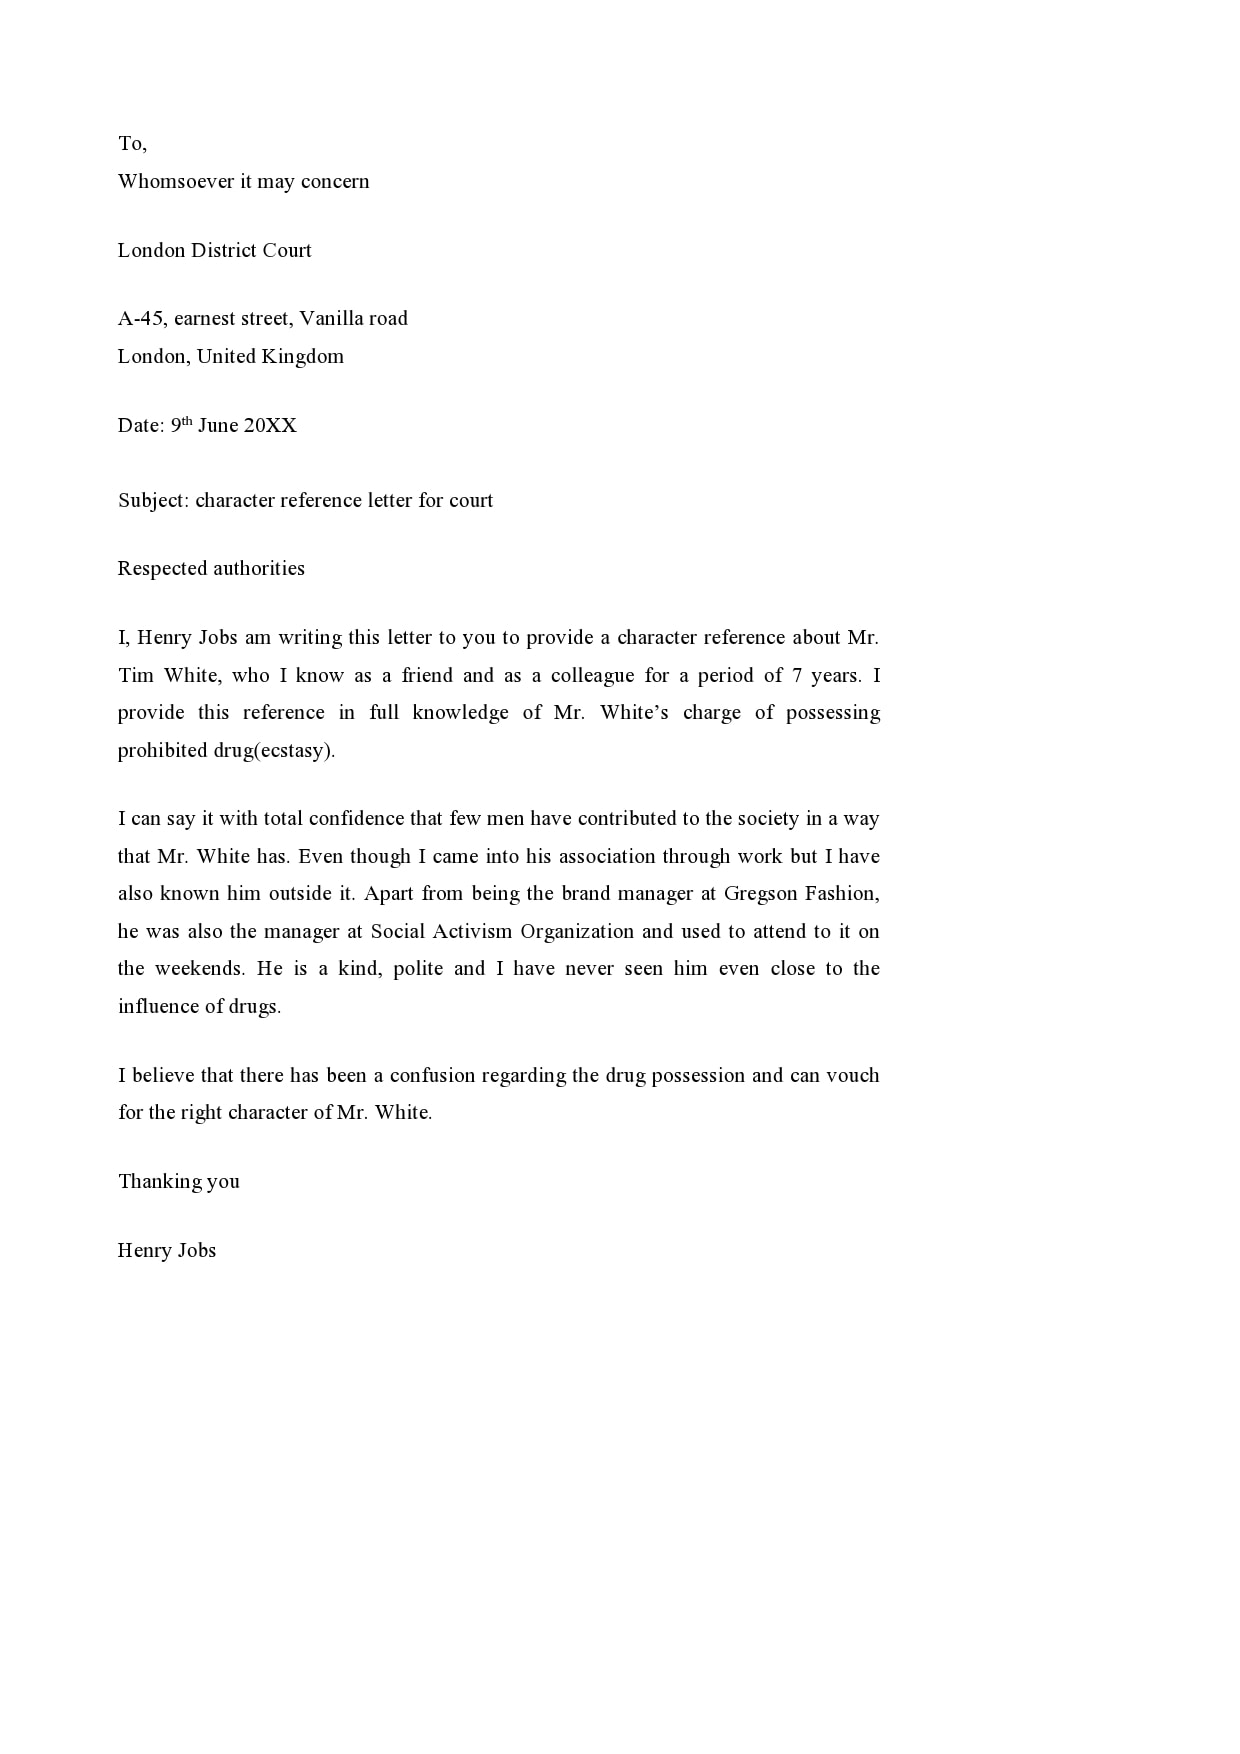 Personal Letter Of Recommendation Sample For A Friend from templatearchive.com